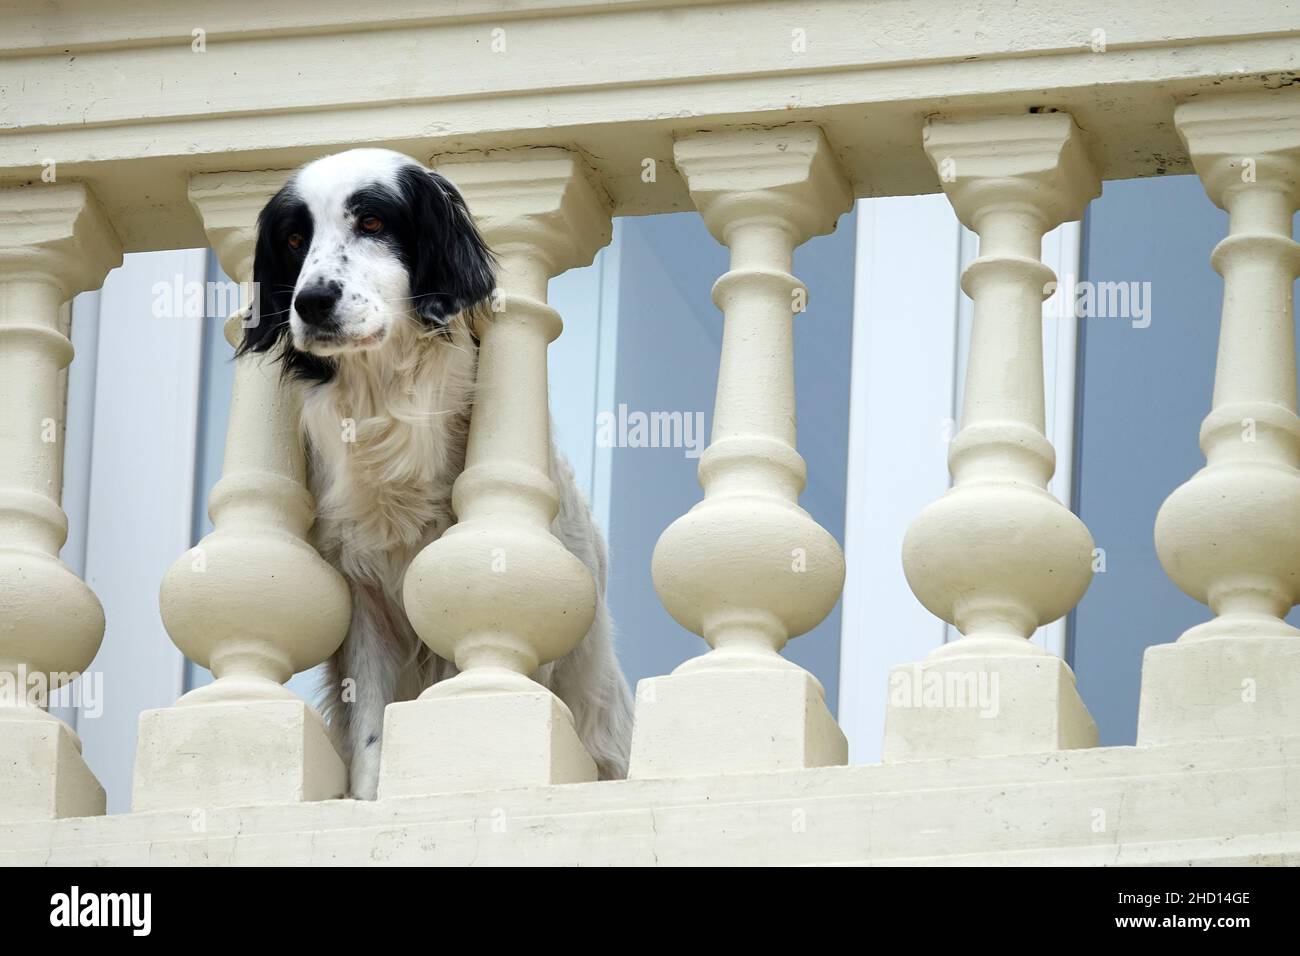 Dog's head sticking out of the balcony balustrade Stock Photo